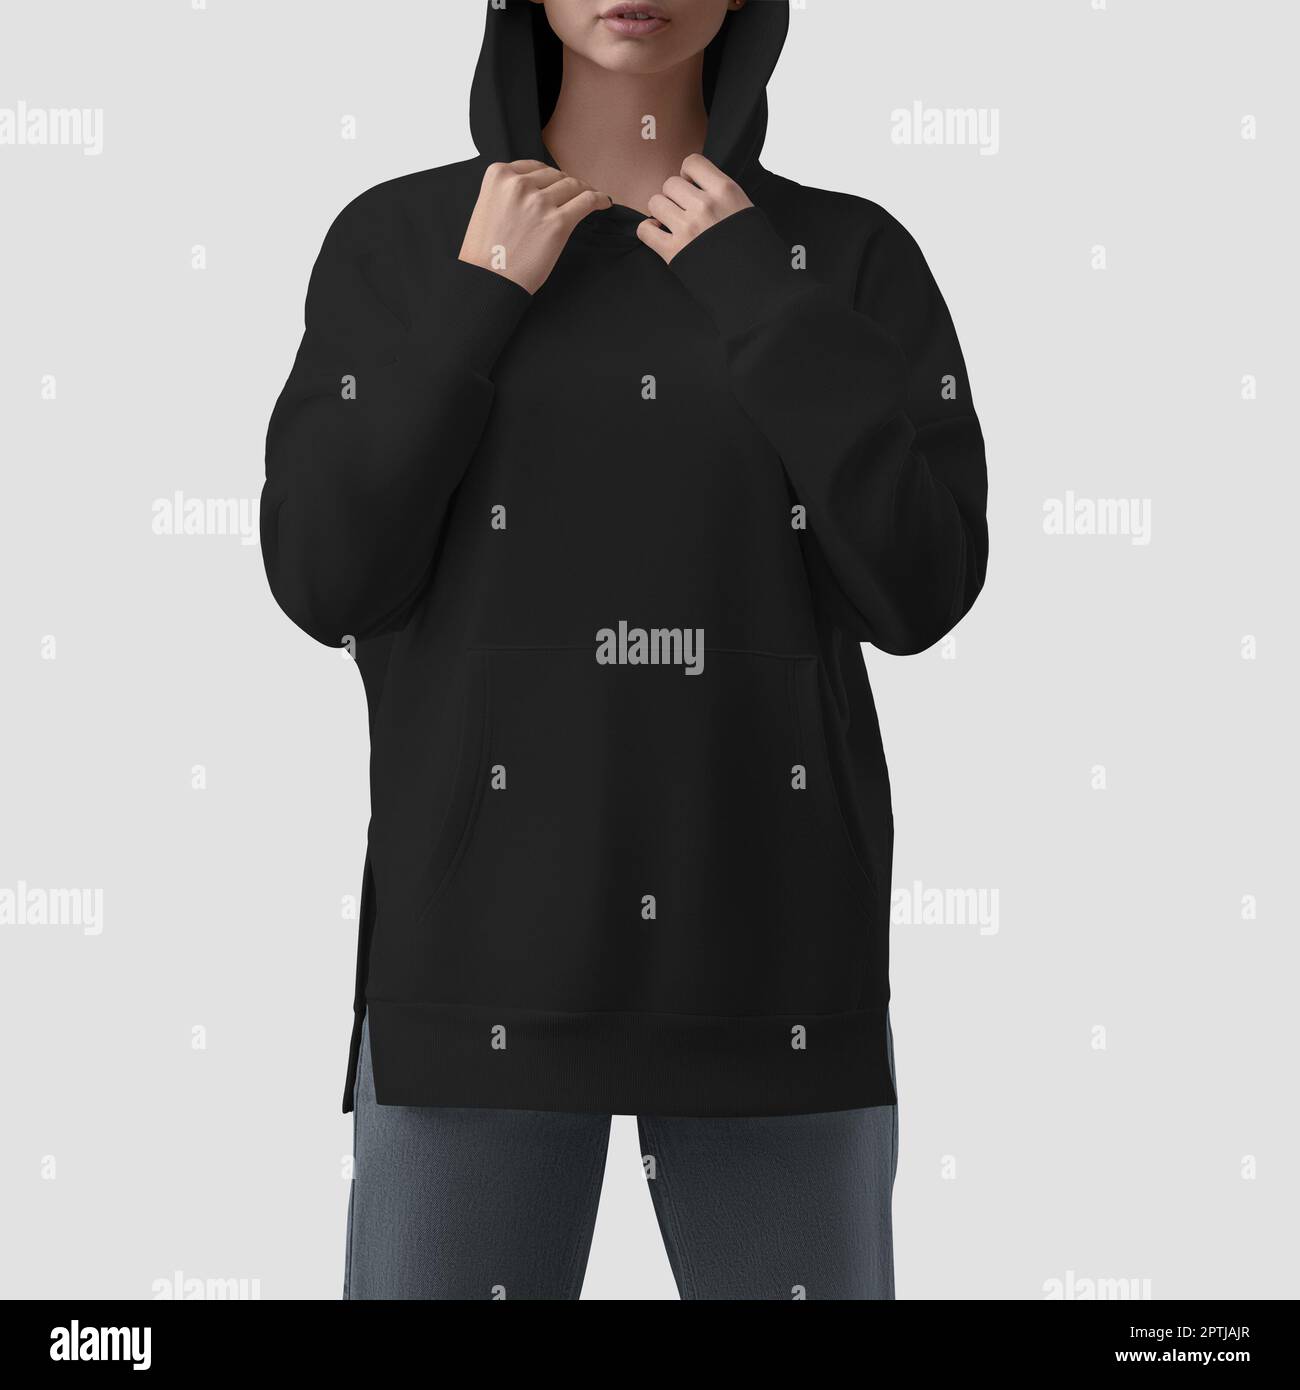 Blank black hoodie mockup on hooded girl, casual apparel closeup, front view, women's shirt for design, brand. Trendy streetwear template, quality clo Stock Photo